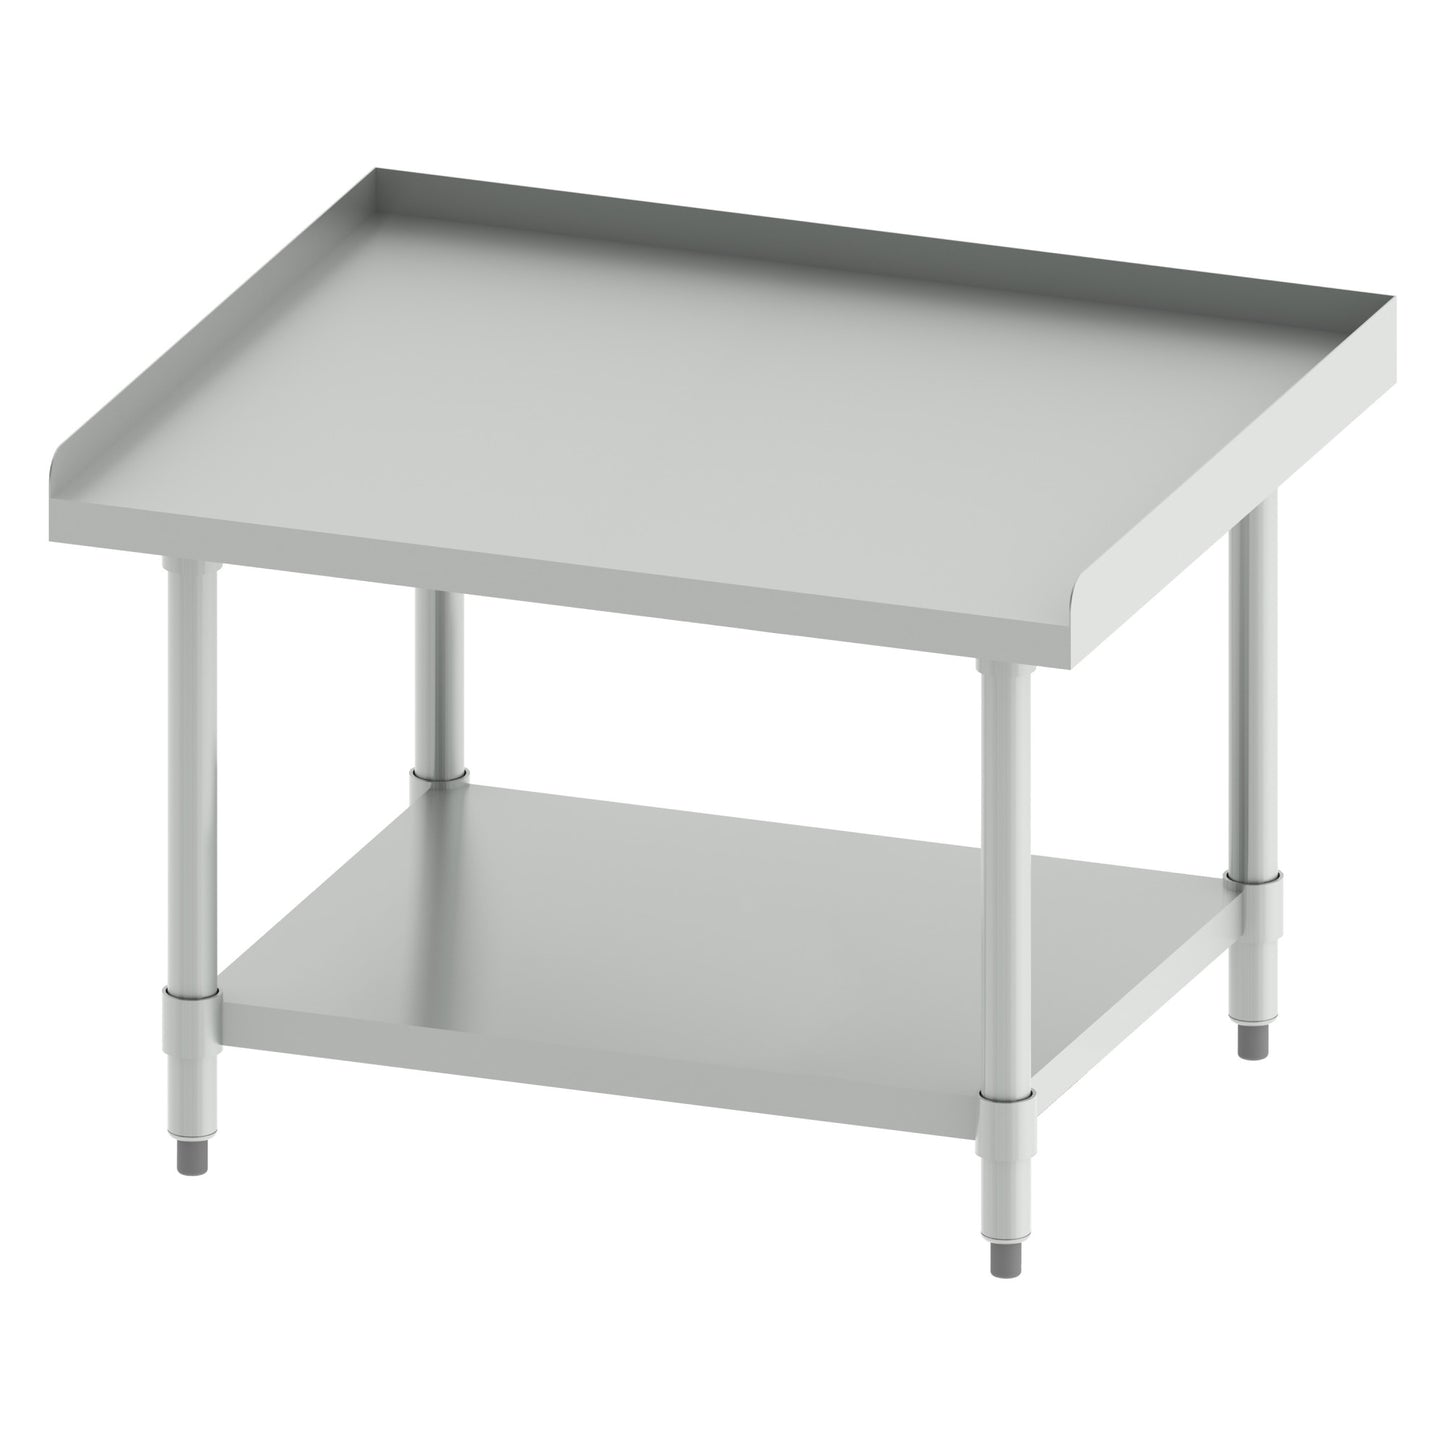 ES-3630 - Stainless Steel Equipment Stand - 36" x 30" x 24"